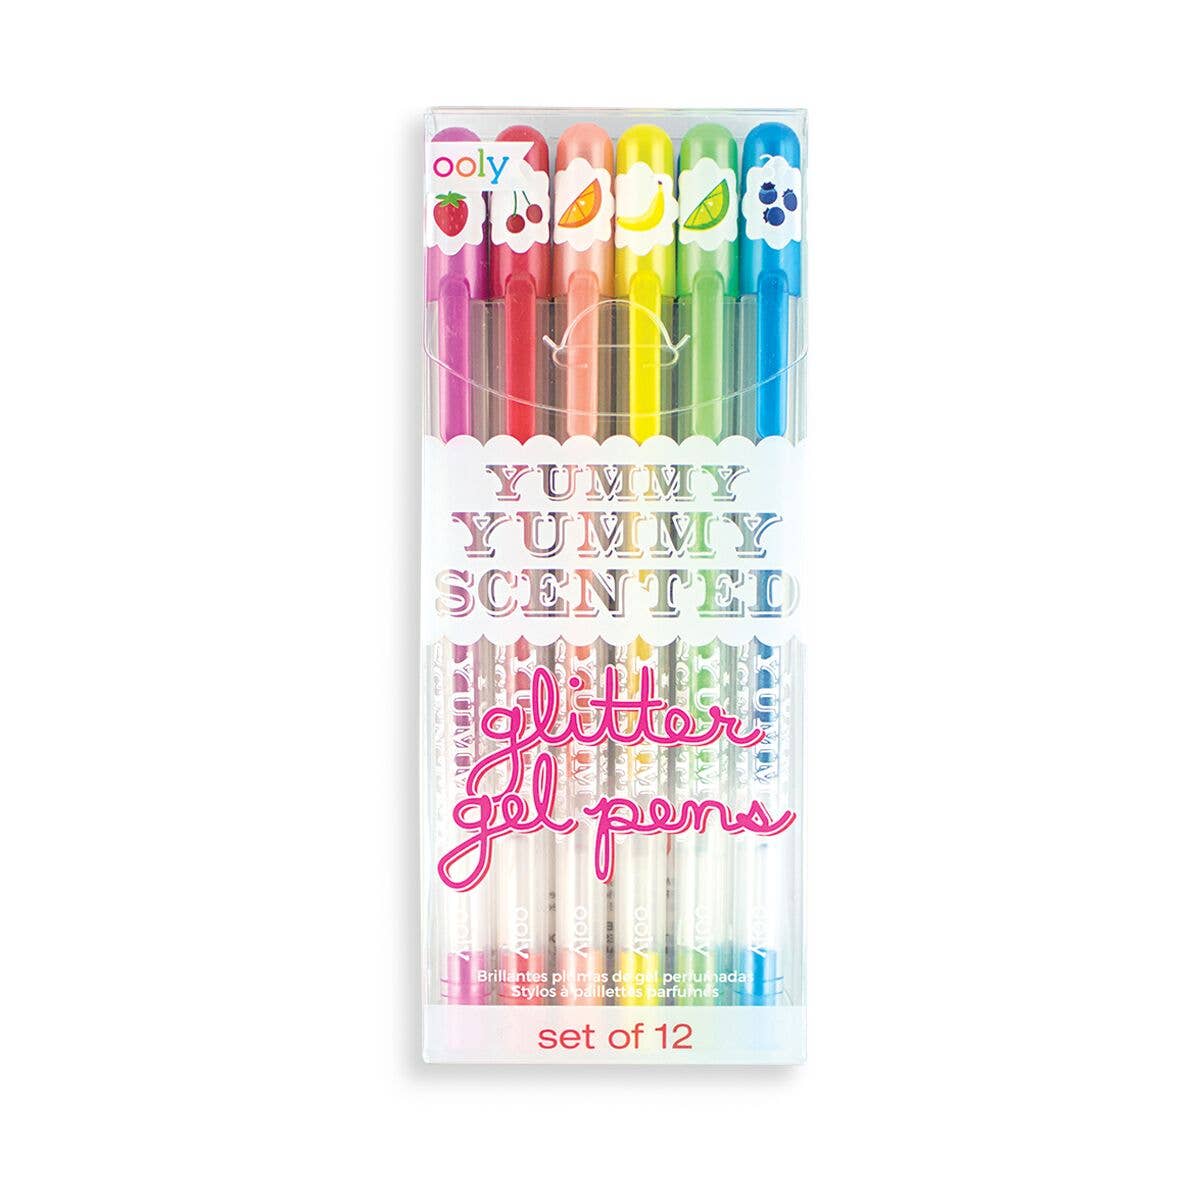 OOLY: Yummy Yummy Scented Gel Pens, Set of 12 by Ooly